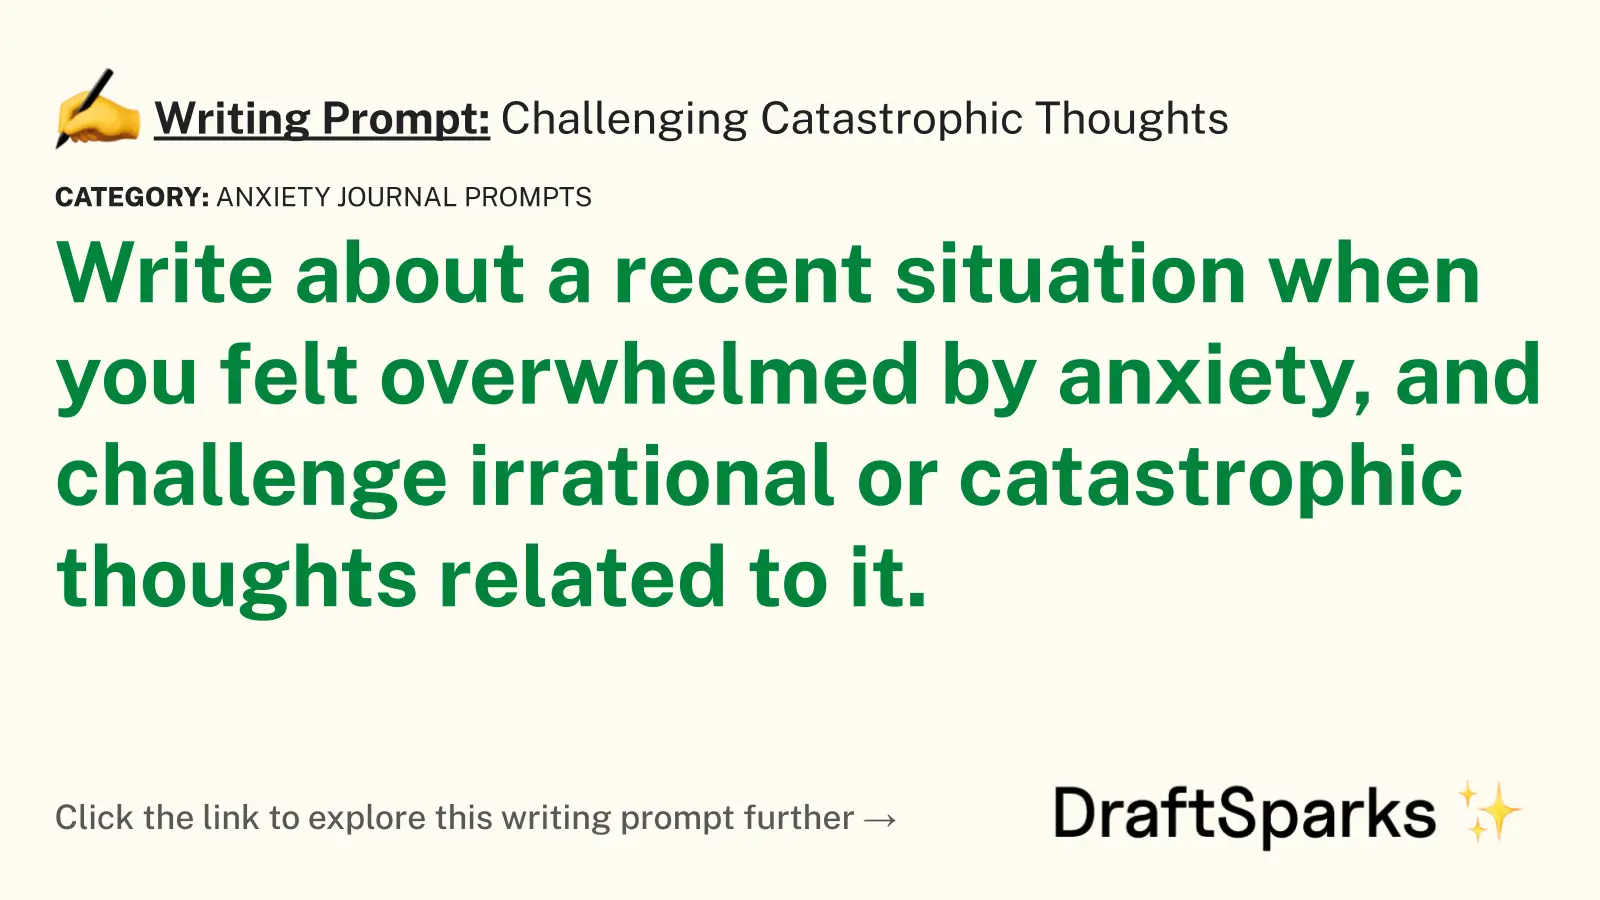 Challenging Catastrophic Thoughts